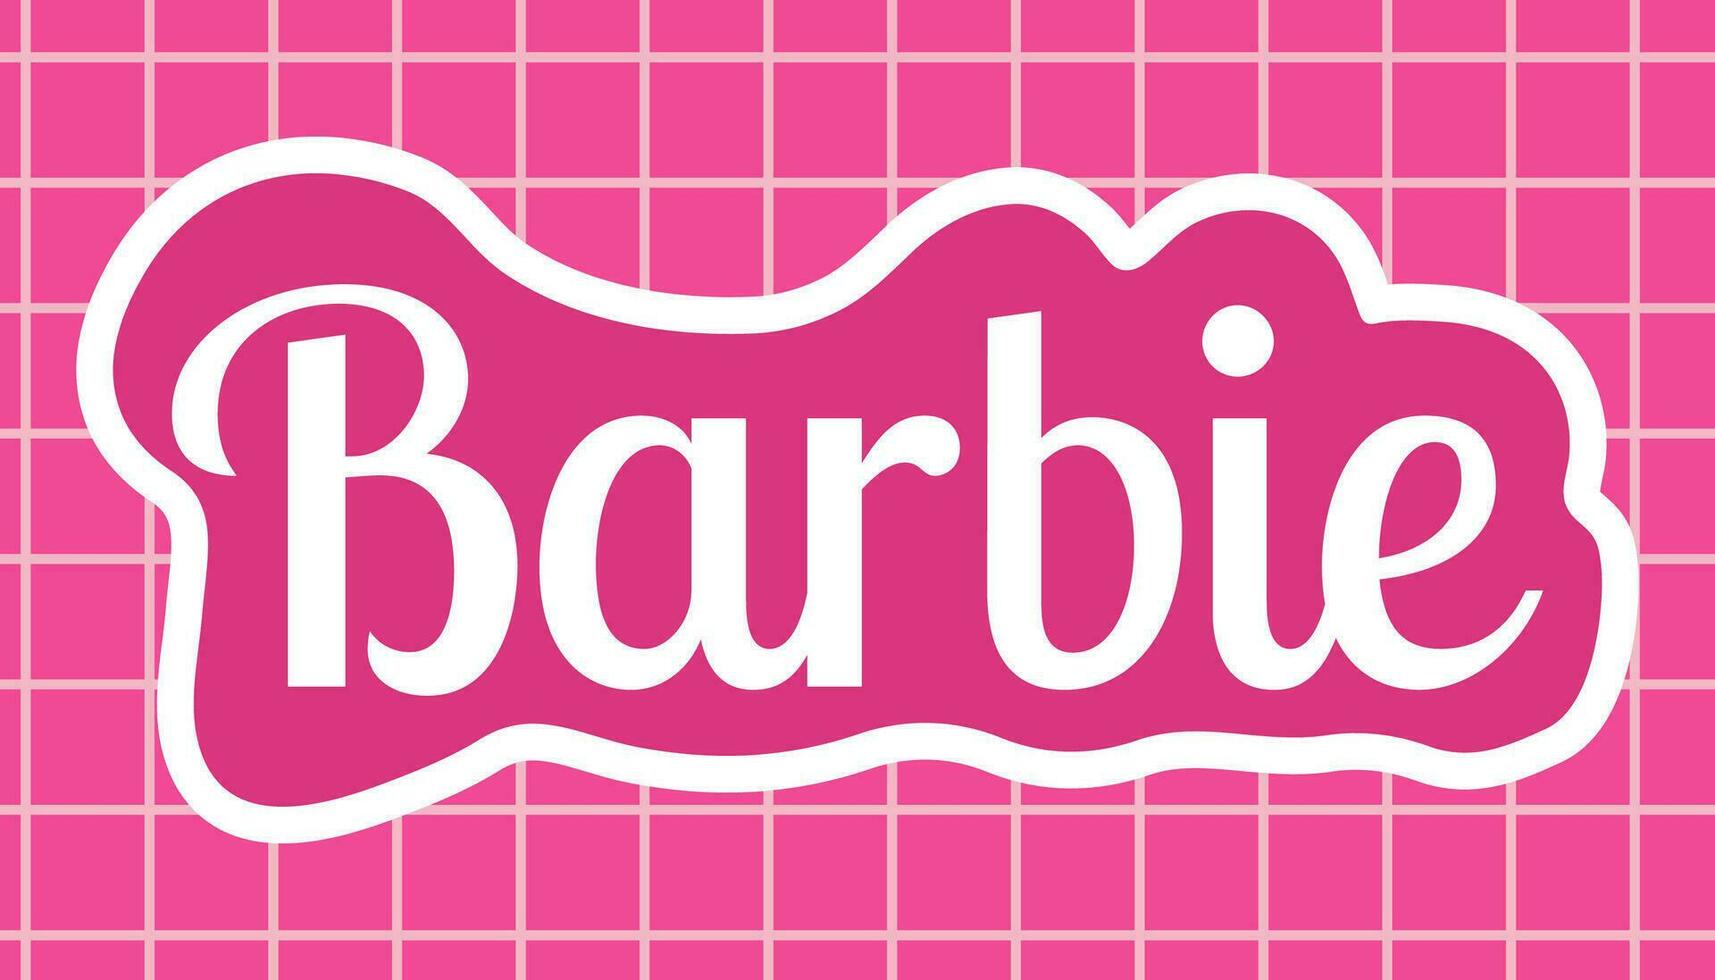 August 2023. Barbie doll. Barbie inscription on a pink background with grid. Editorial. Sticker. Vector